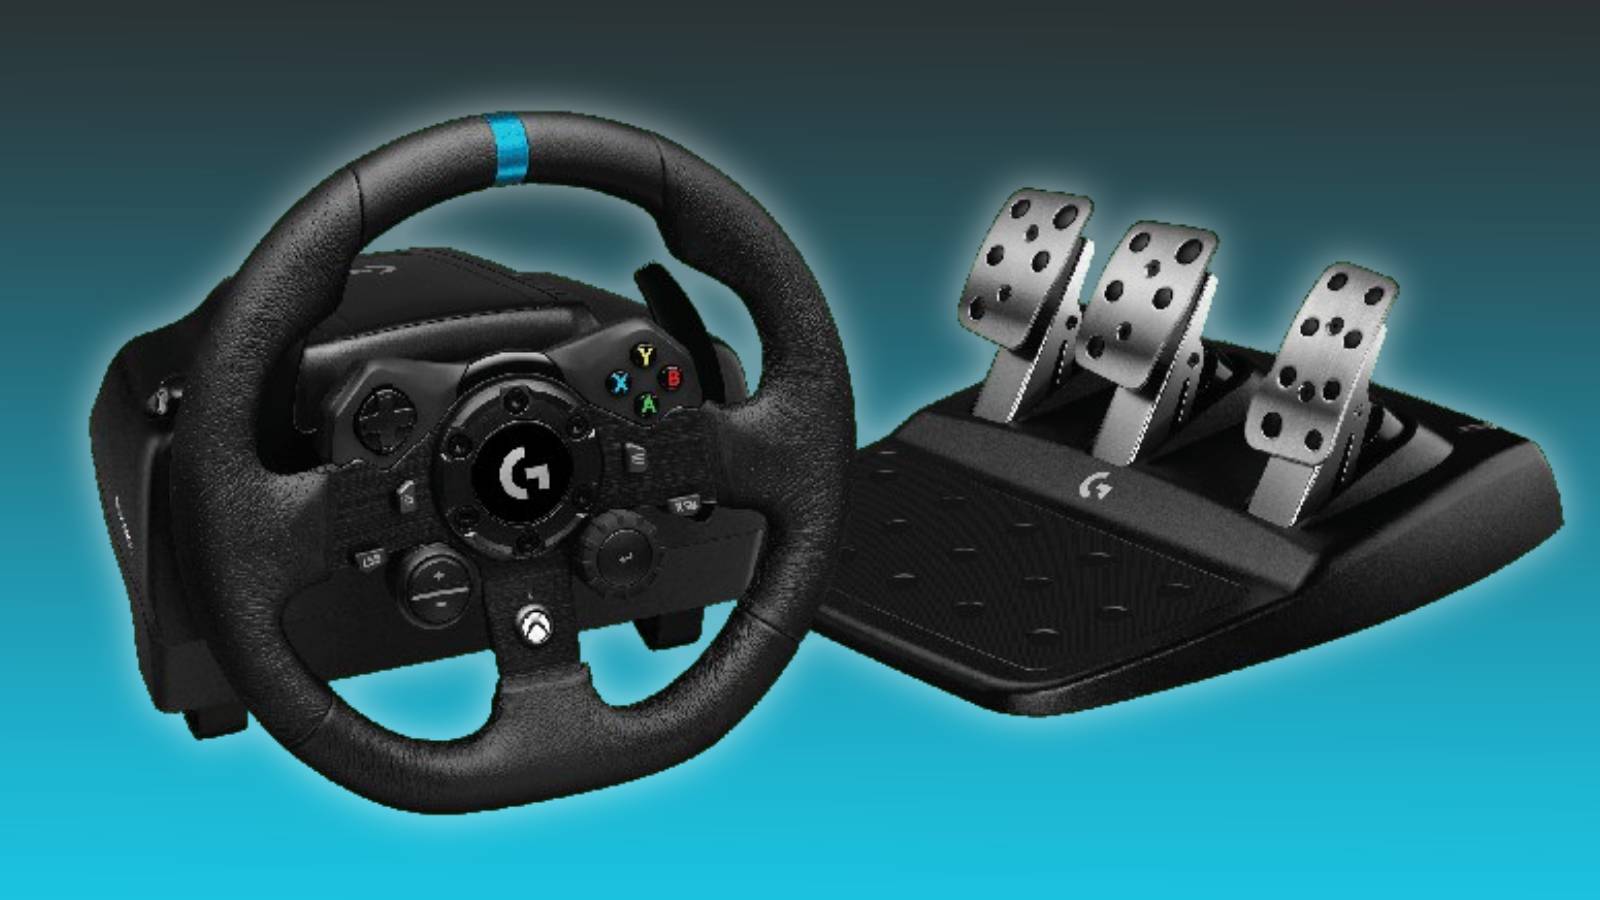 Colossal Logitech racing wheel and pedal  bargain drives price down  25% - Dexerto